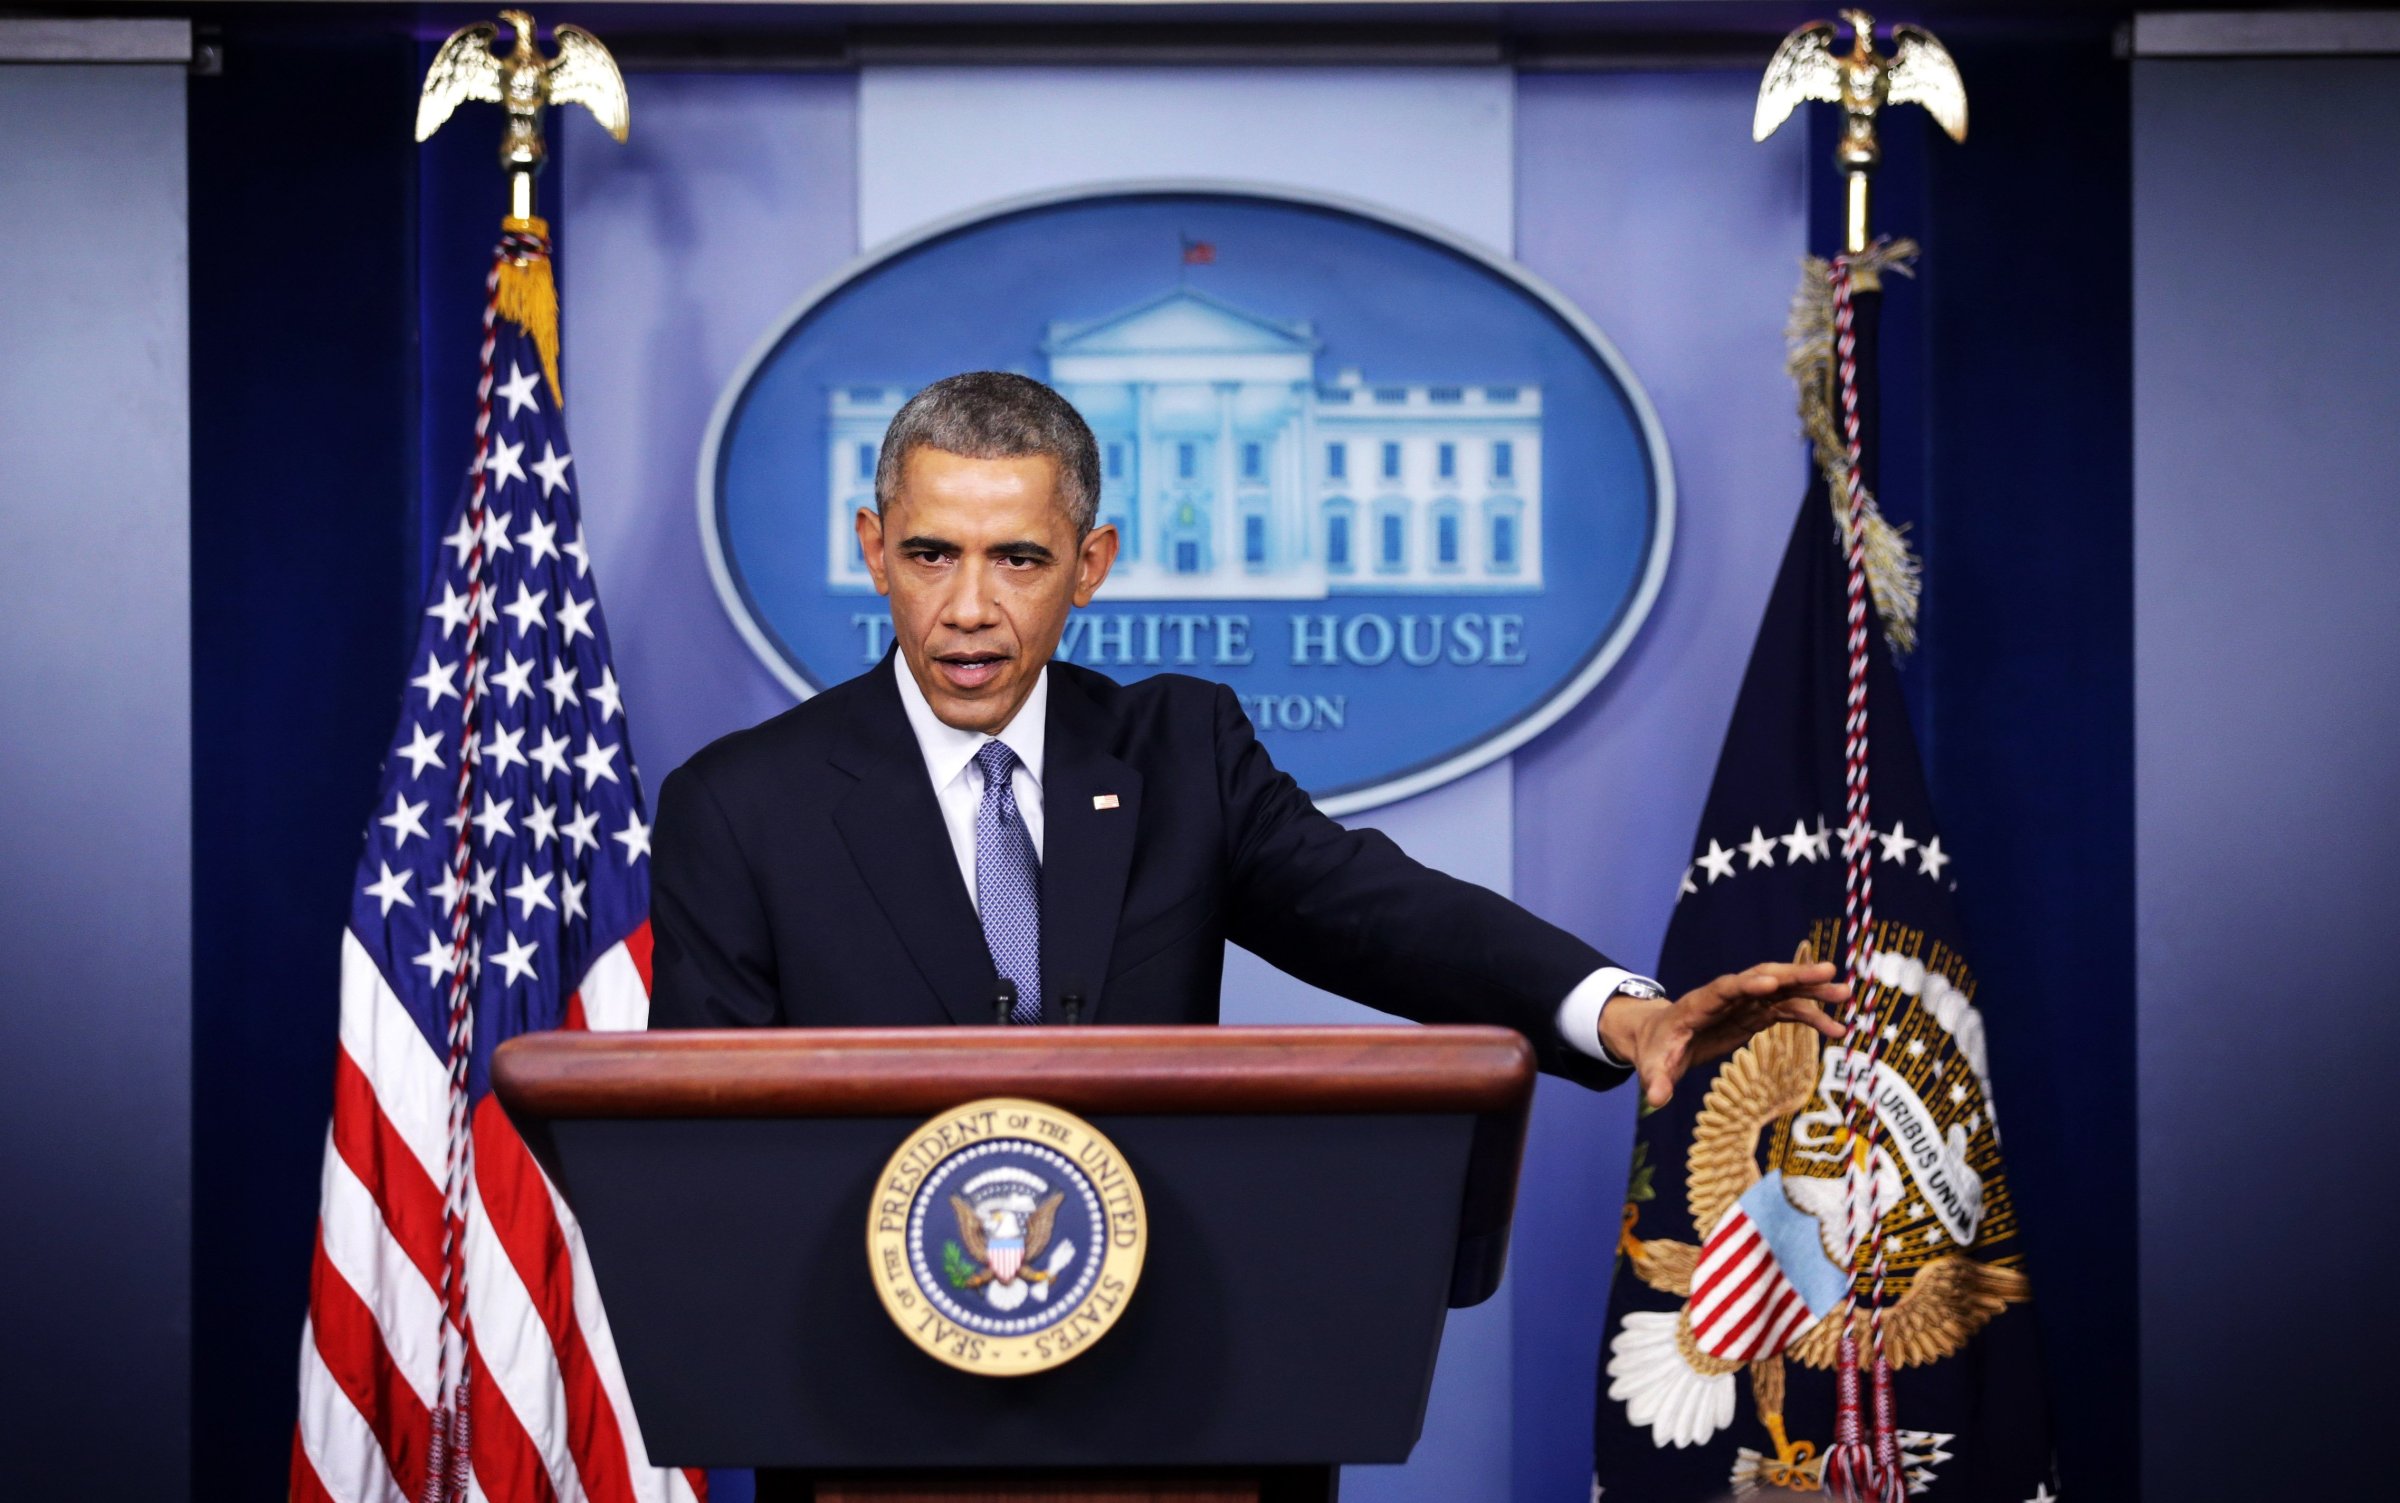 President Barack Obama speaks during his speech to members of the media during his last news conference of the year in the James Brady Press Briefing Room of the White House on Dec. 19, 2014 in Washington.